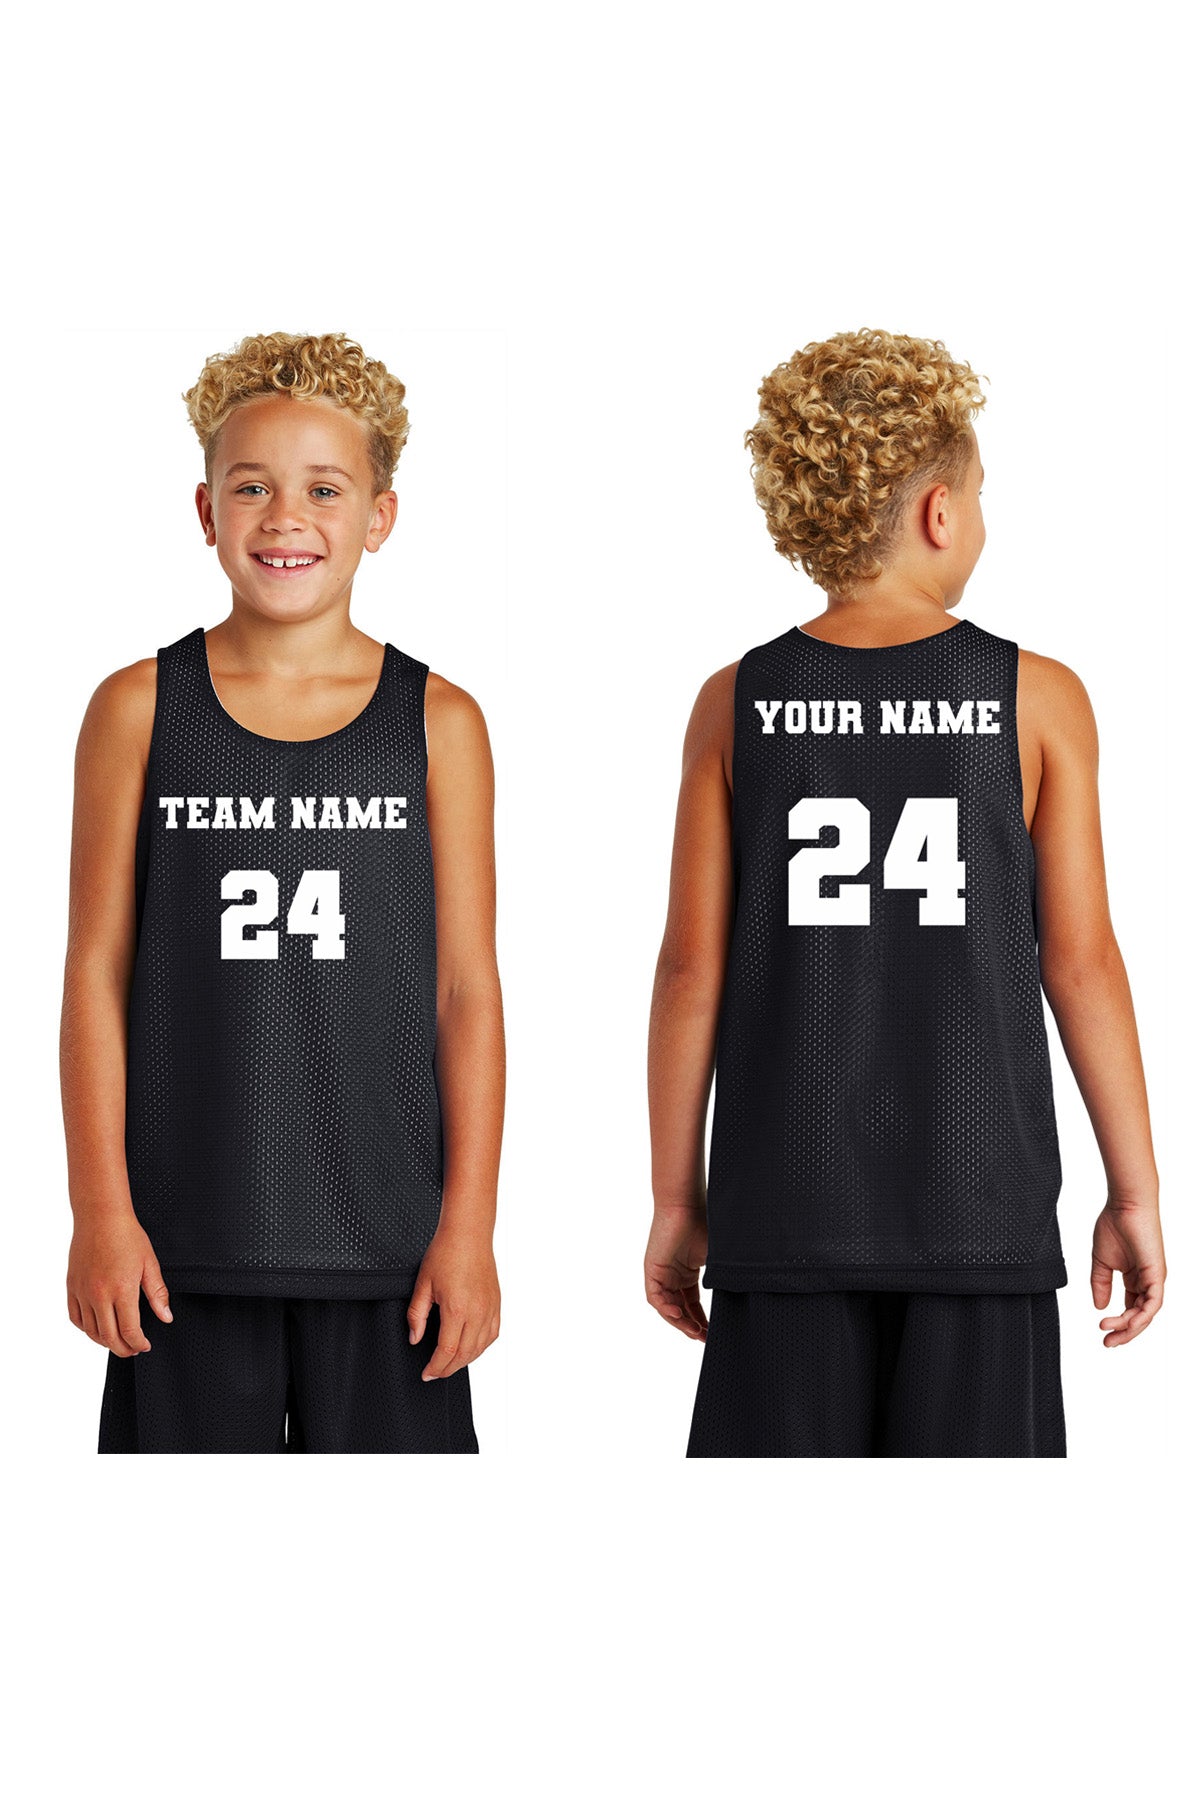  Custom Basketball Jersey for Men Youth Kids with Name